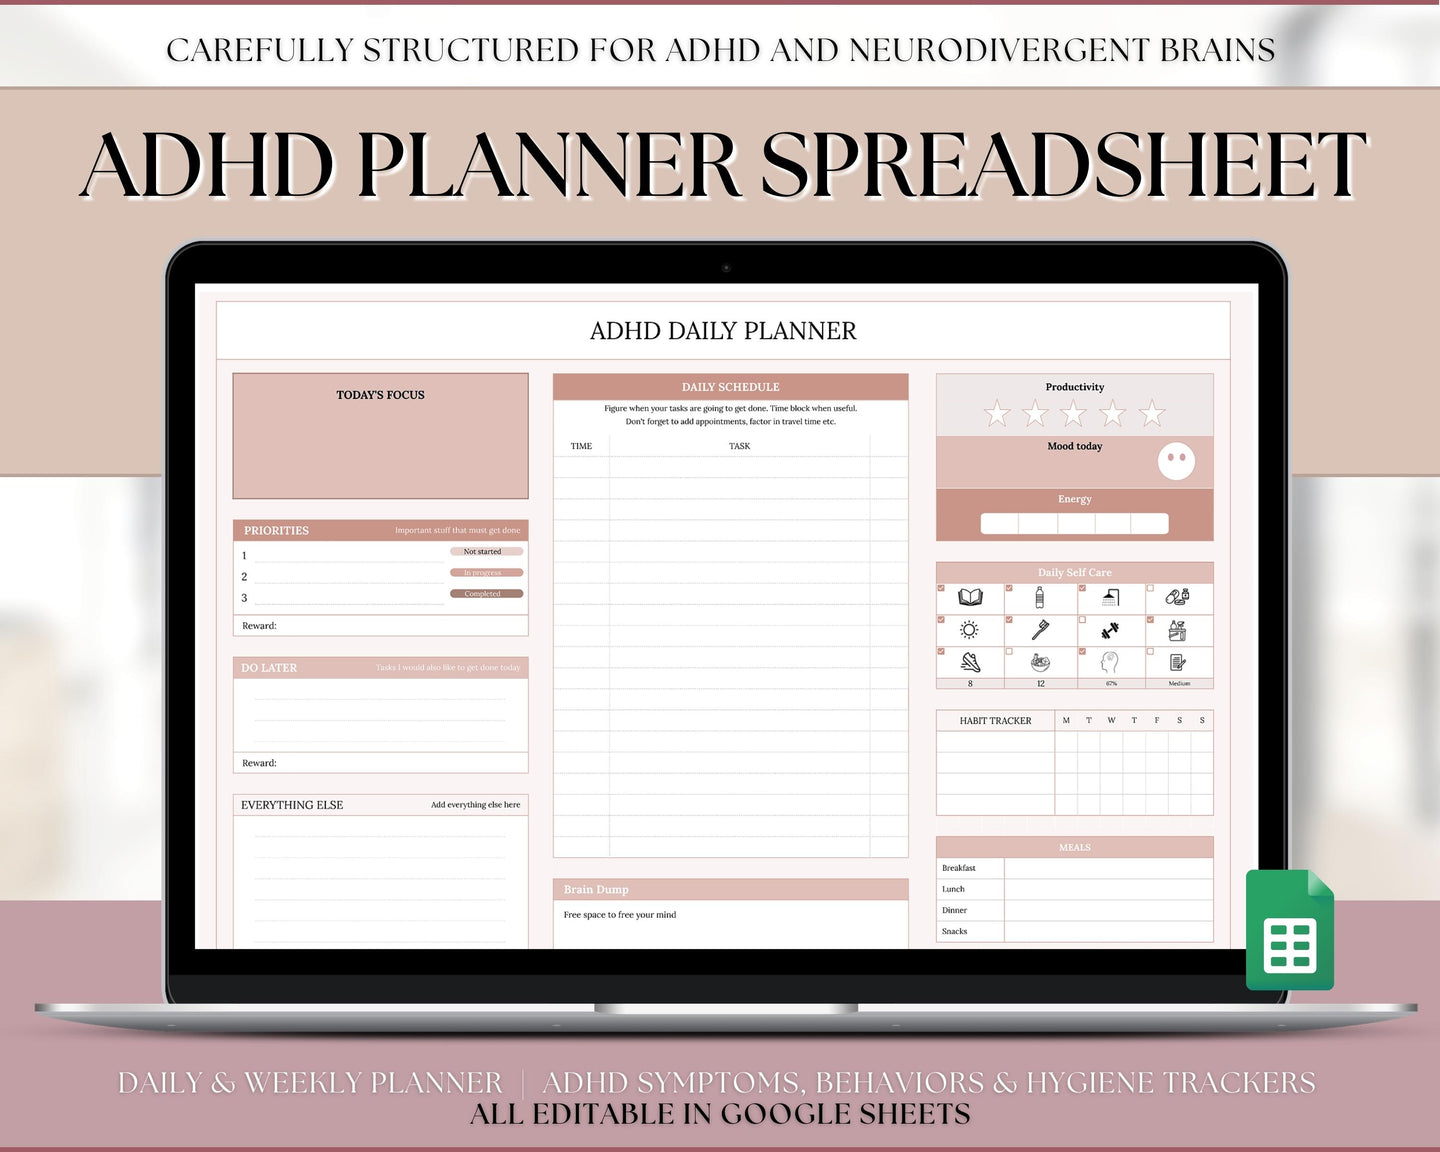 ADHD Planner Spreadsheet for Neurodivergent Adults | Google Sheets Daily & Weekly Planner, Symptom Tracker, Brain Dump & To Do Lists | Nude